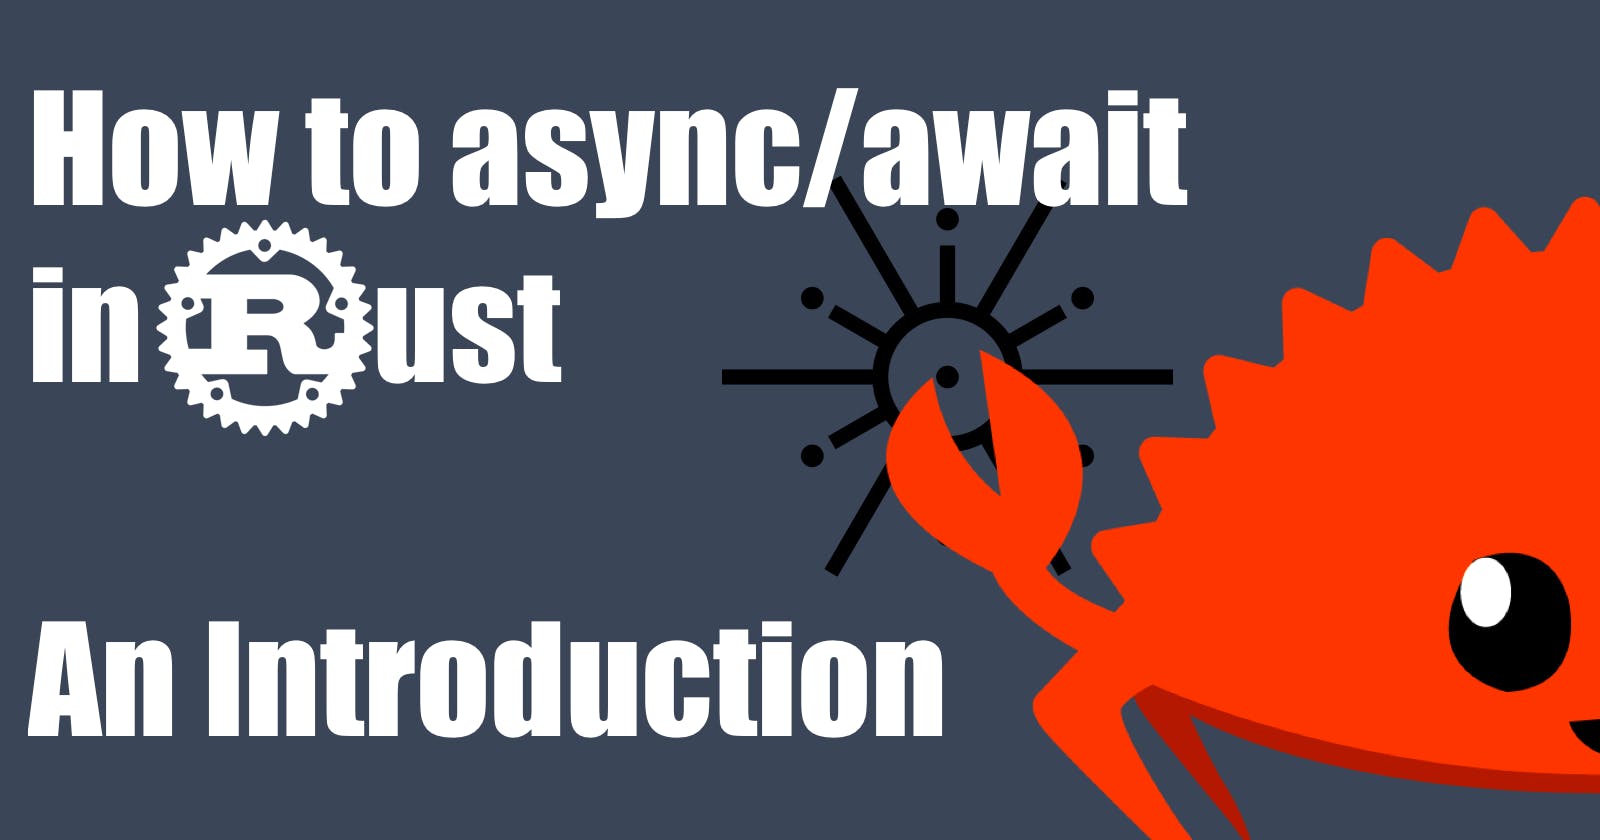 How to async/await in Rust: An Introduction